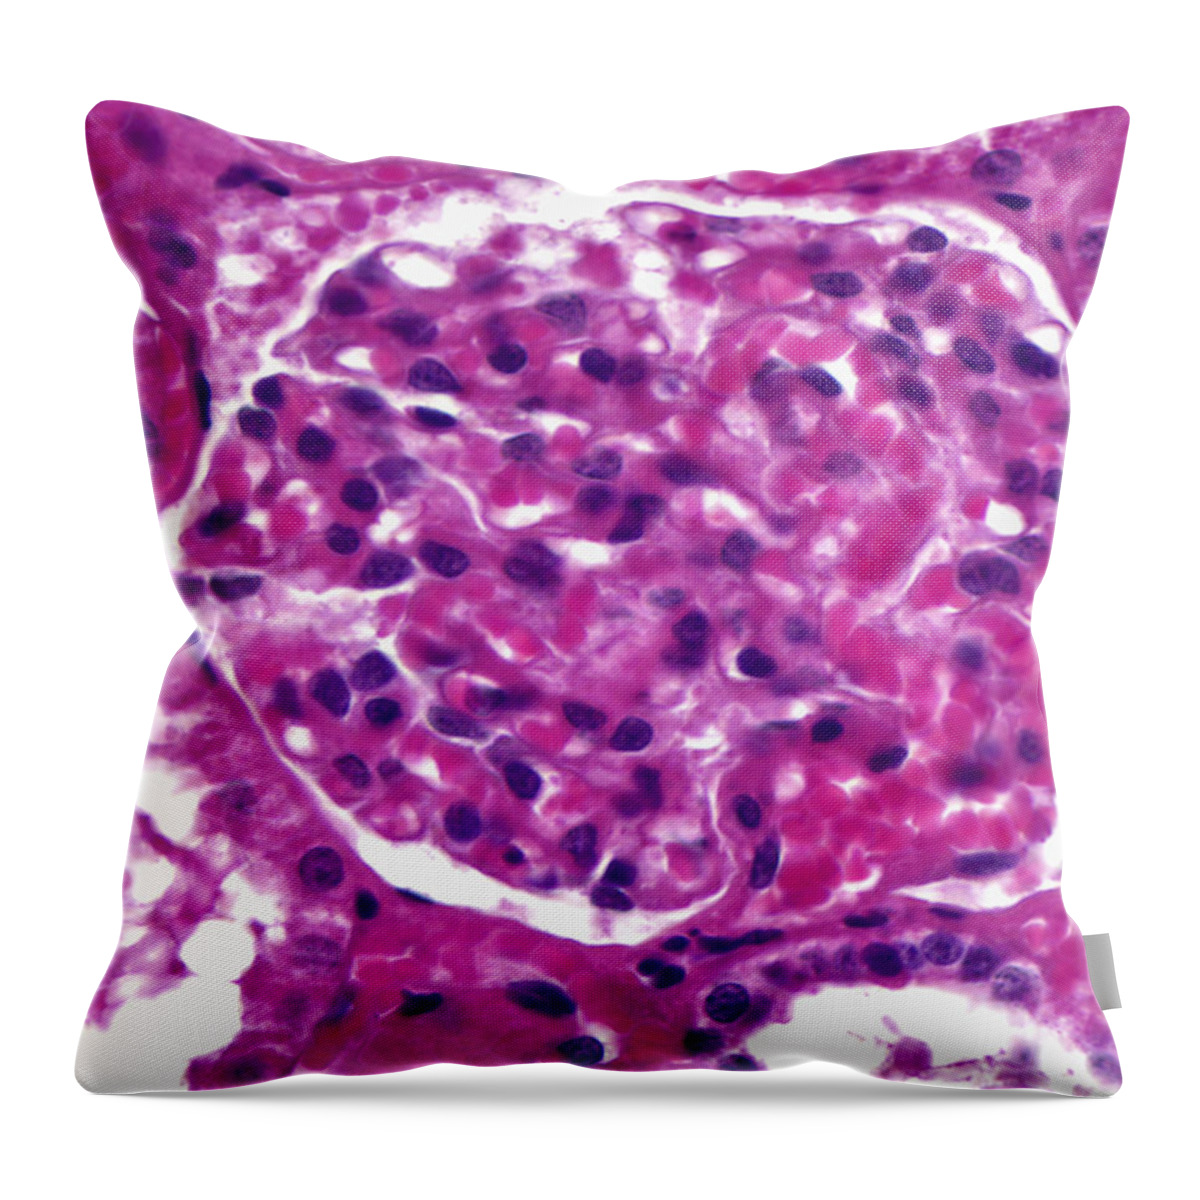 Kidney Throw Pillow featuring the photograph Renal Corpuscle, Lm by Alvin Telser